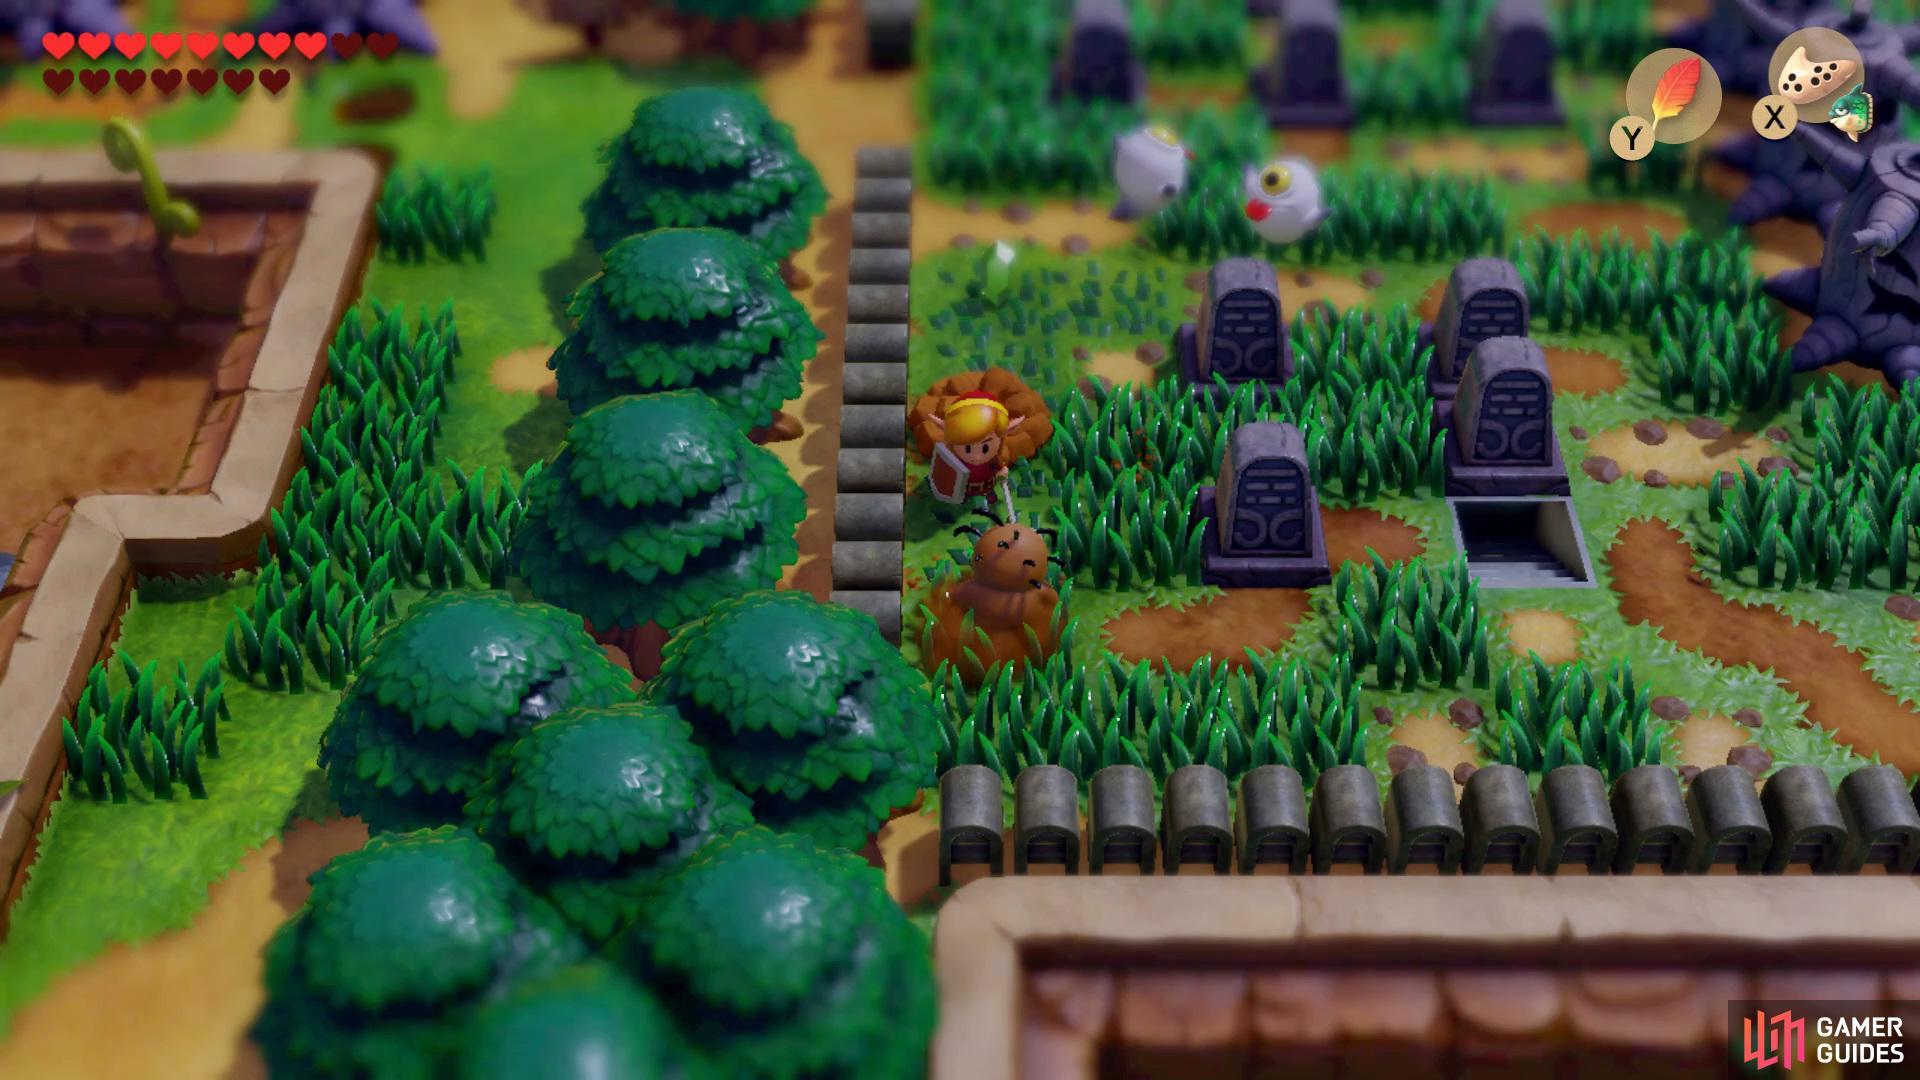 The Zombies will appear near or within the Cemetery, kill them with your Sword, but beware they will just respawn.